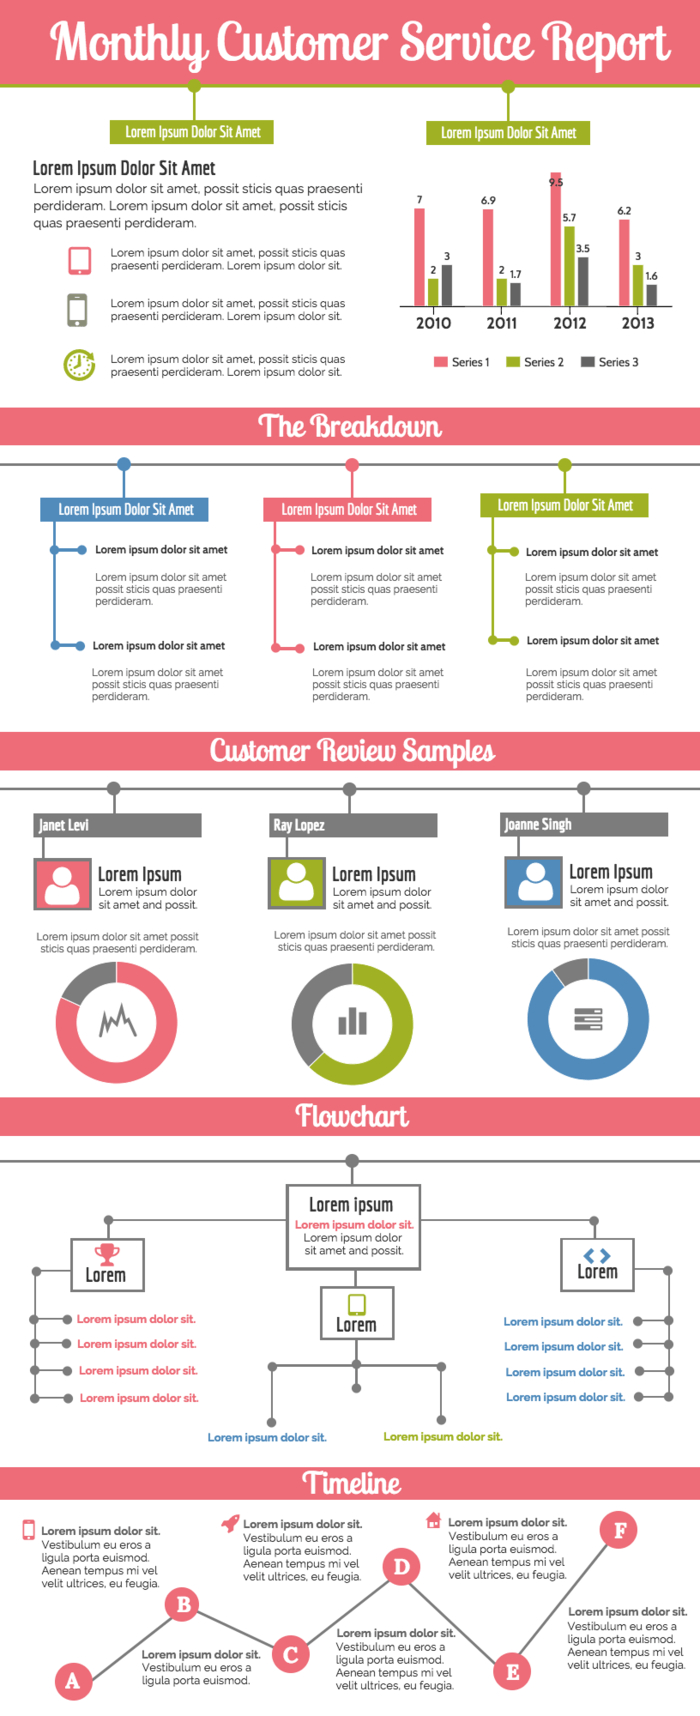 Monthly Customer Service Report In Service Review Report Template